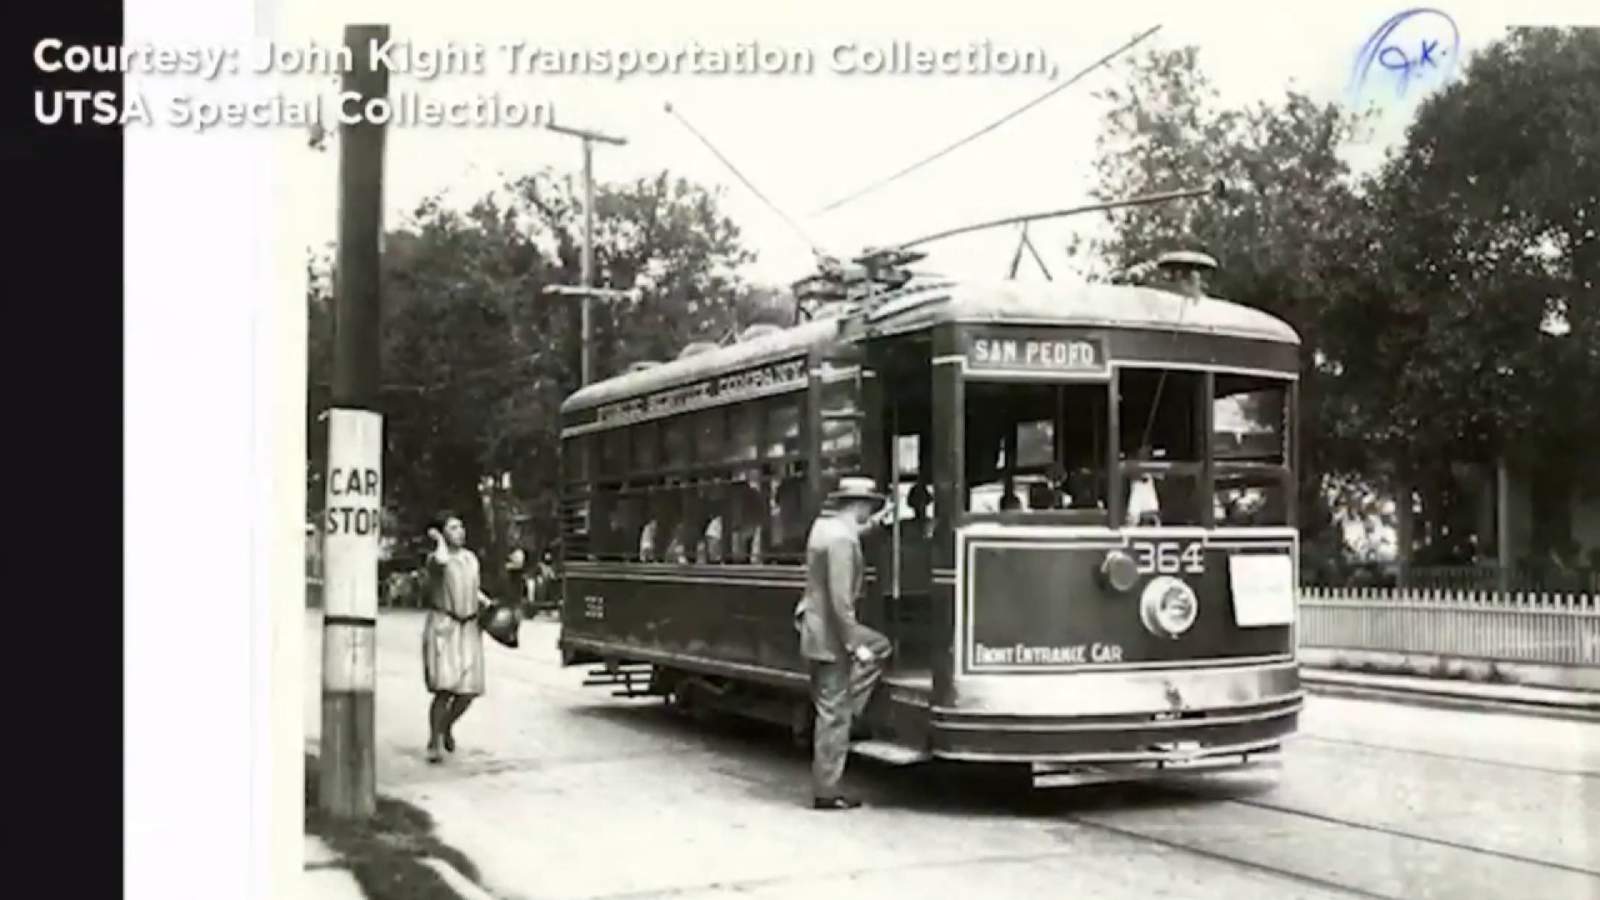 From horse-drawn streetcars to public buses: A look at San Antonio’s public transportation history